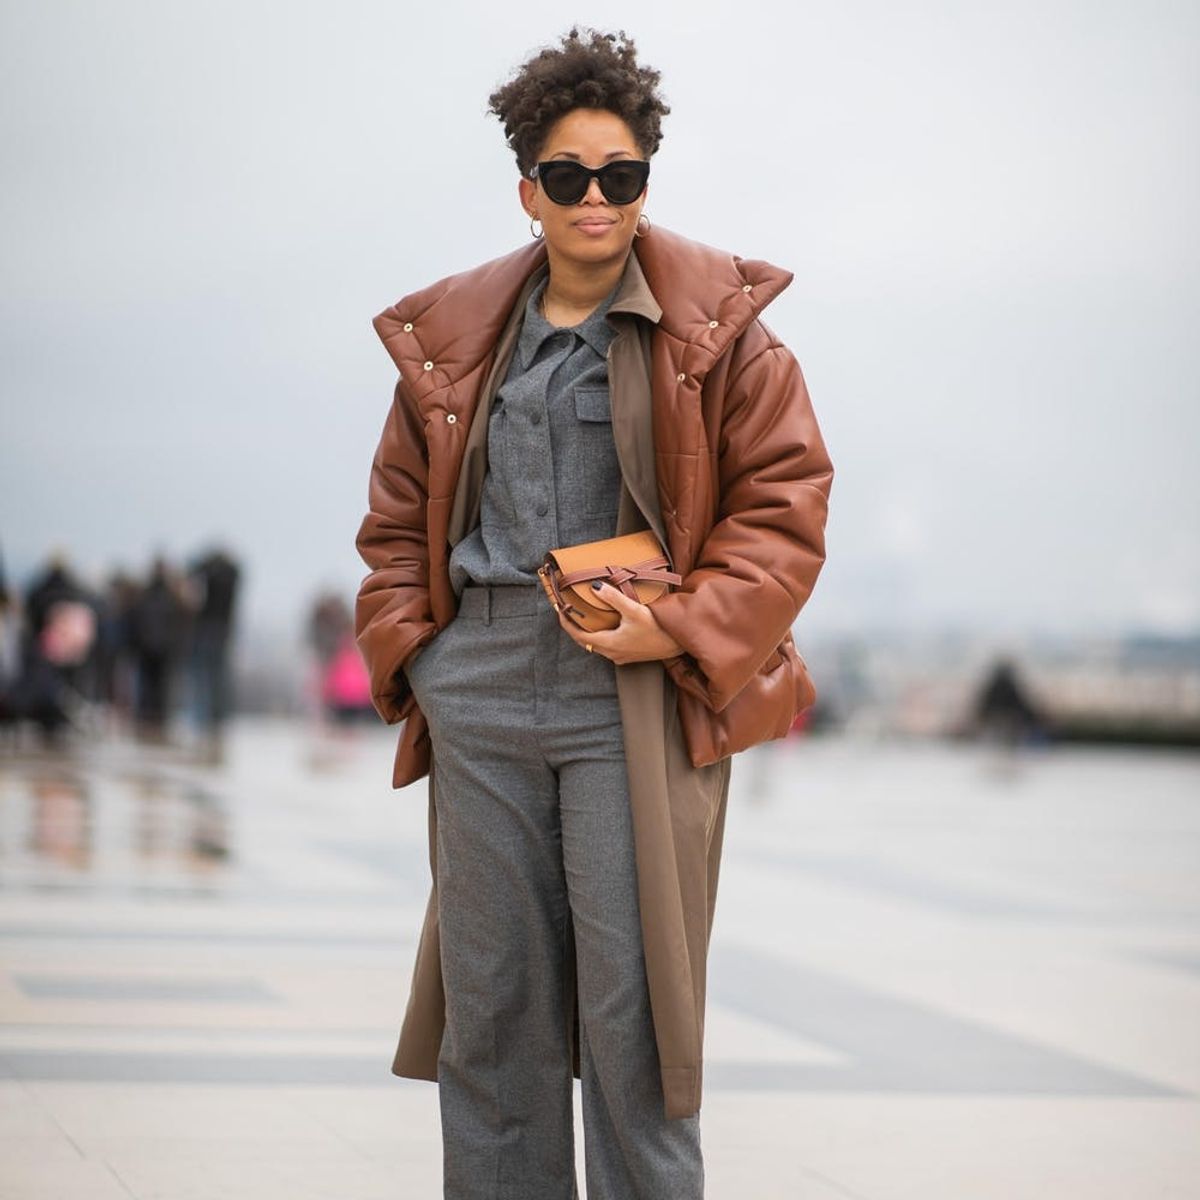 6 Trendy Ways to Layer Your Jackets Like a Street Style Star - Brit + Co